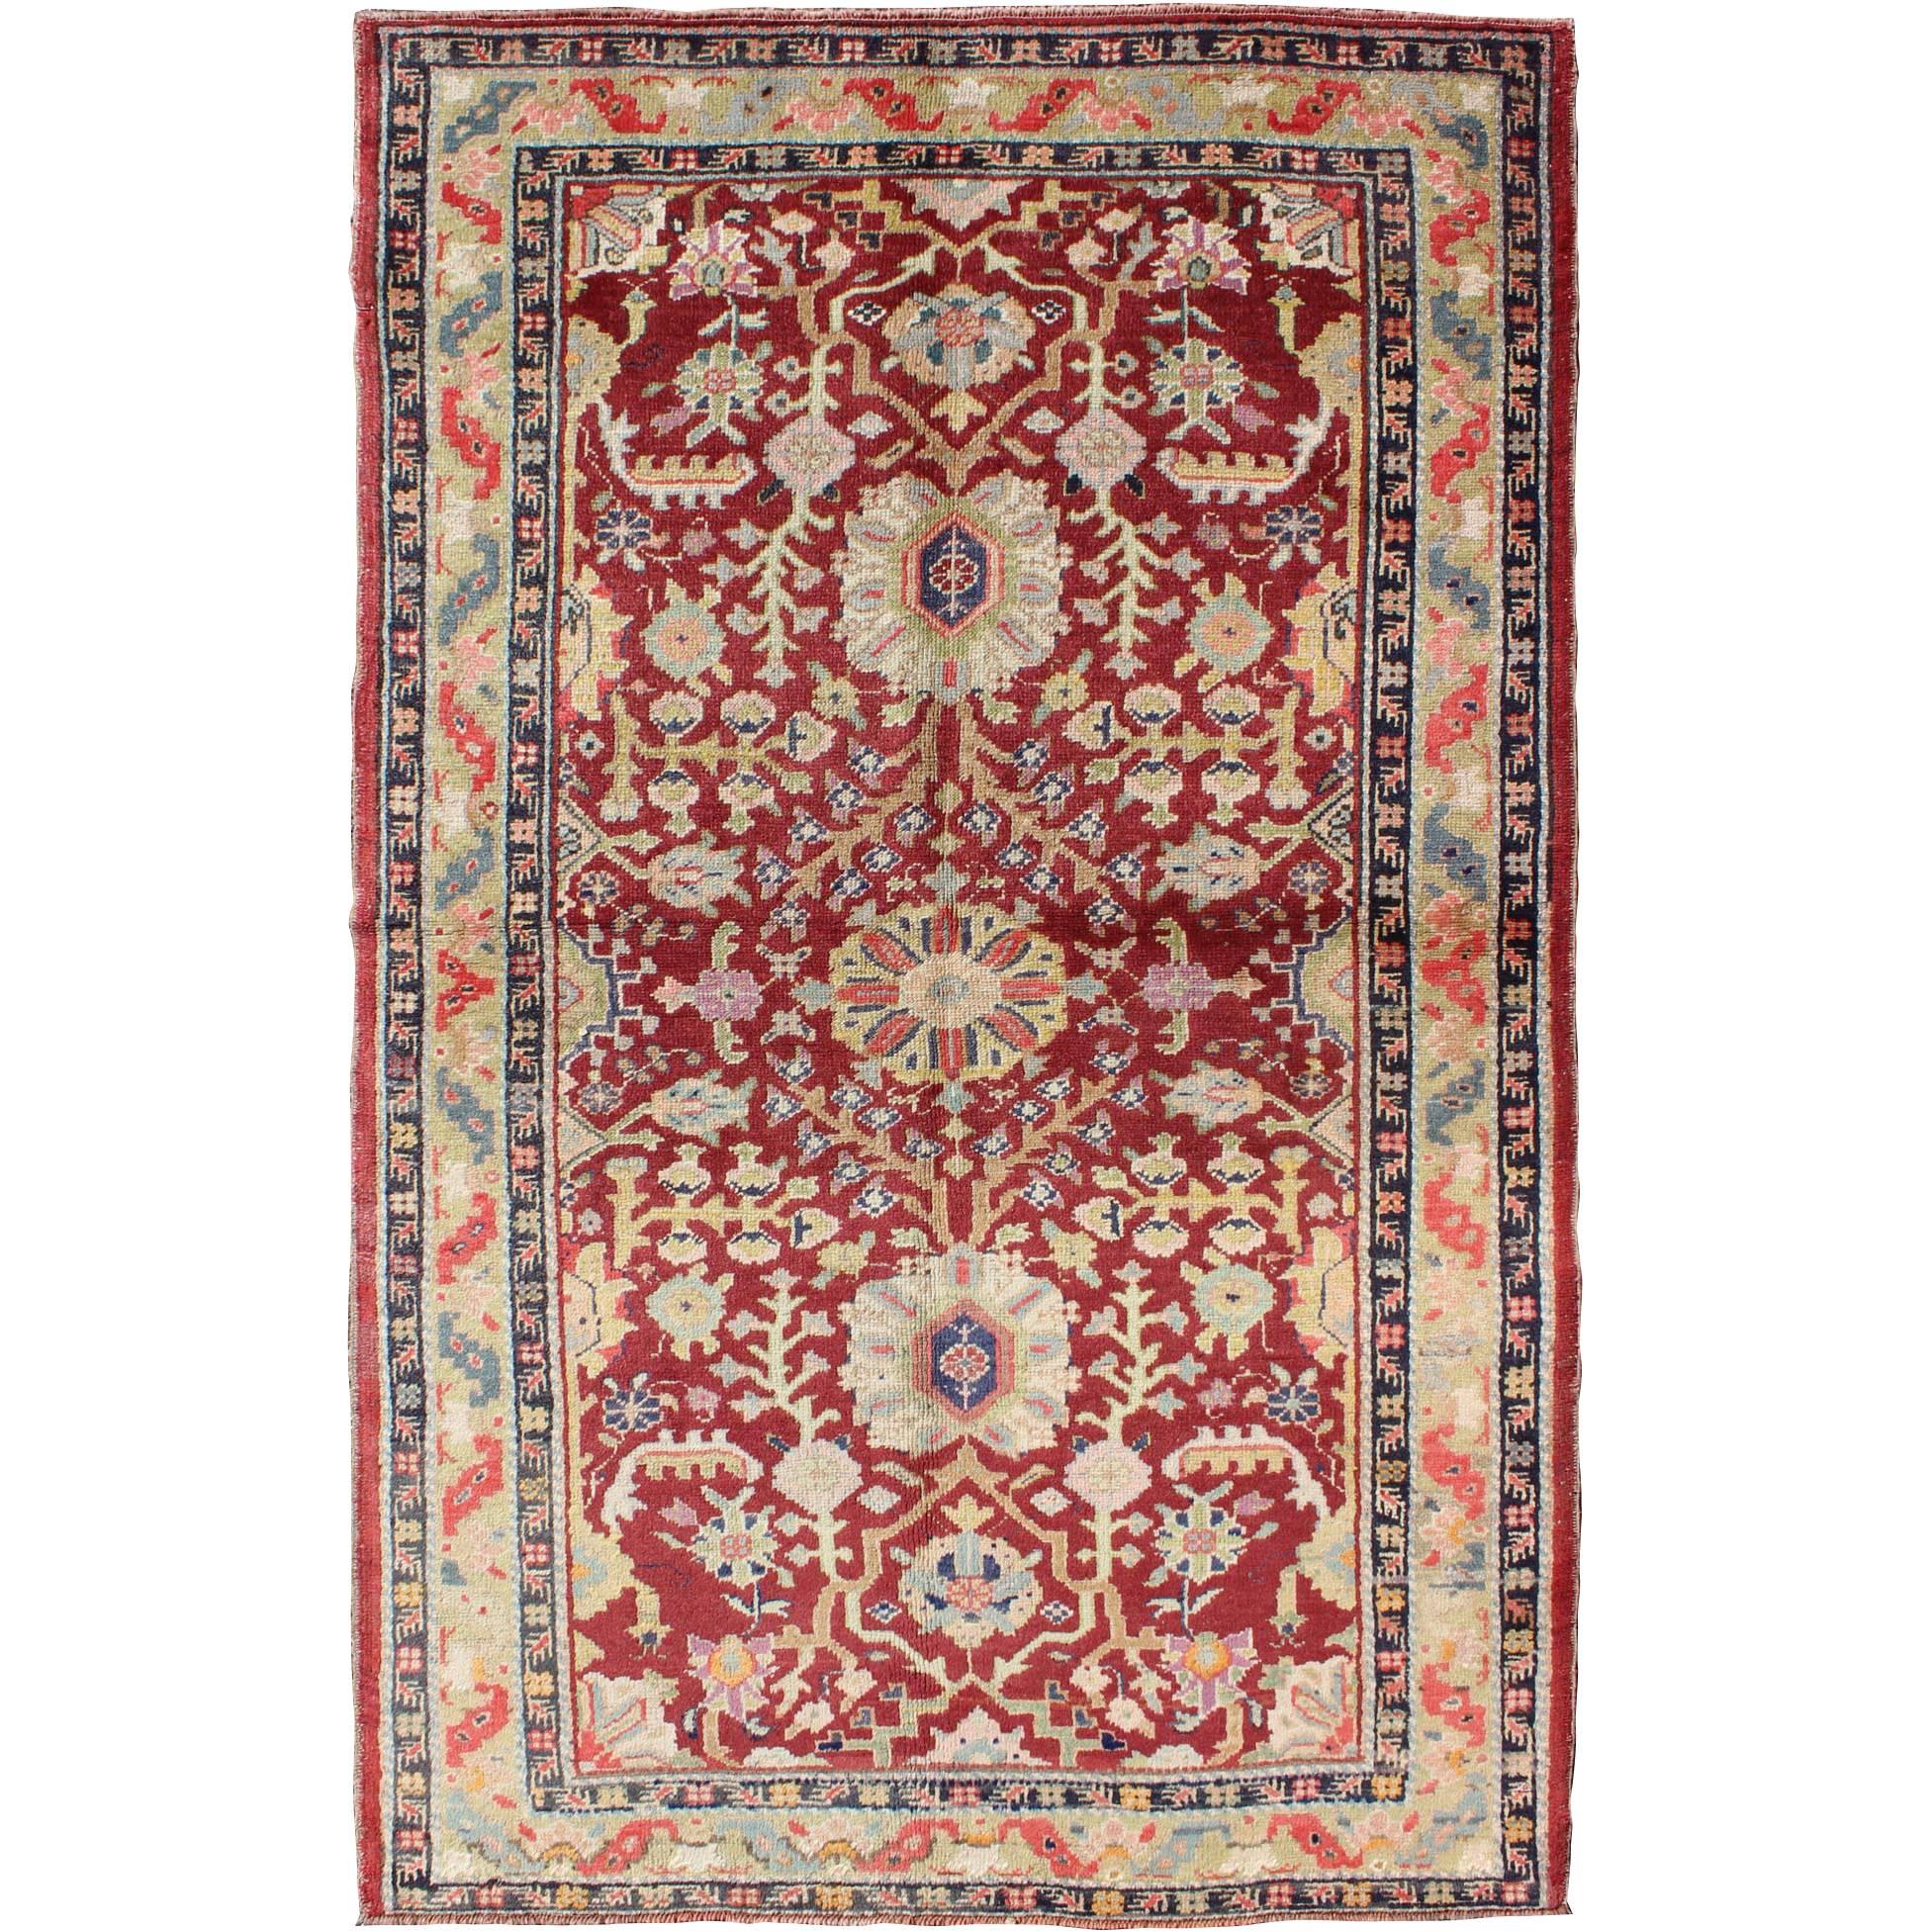 Colorful Turkish Oushak Carpet with Scattered Vines and Flowers on a Red Field